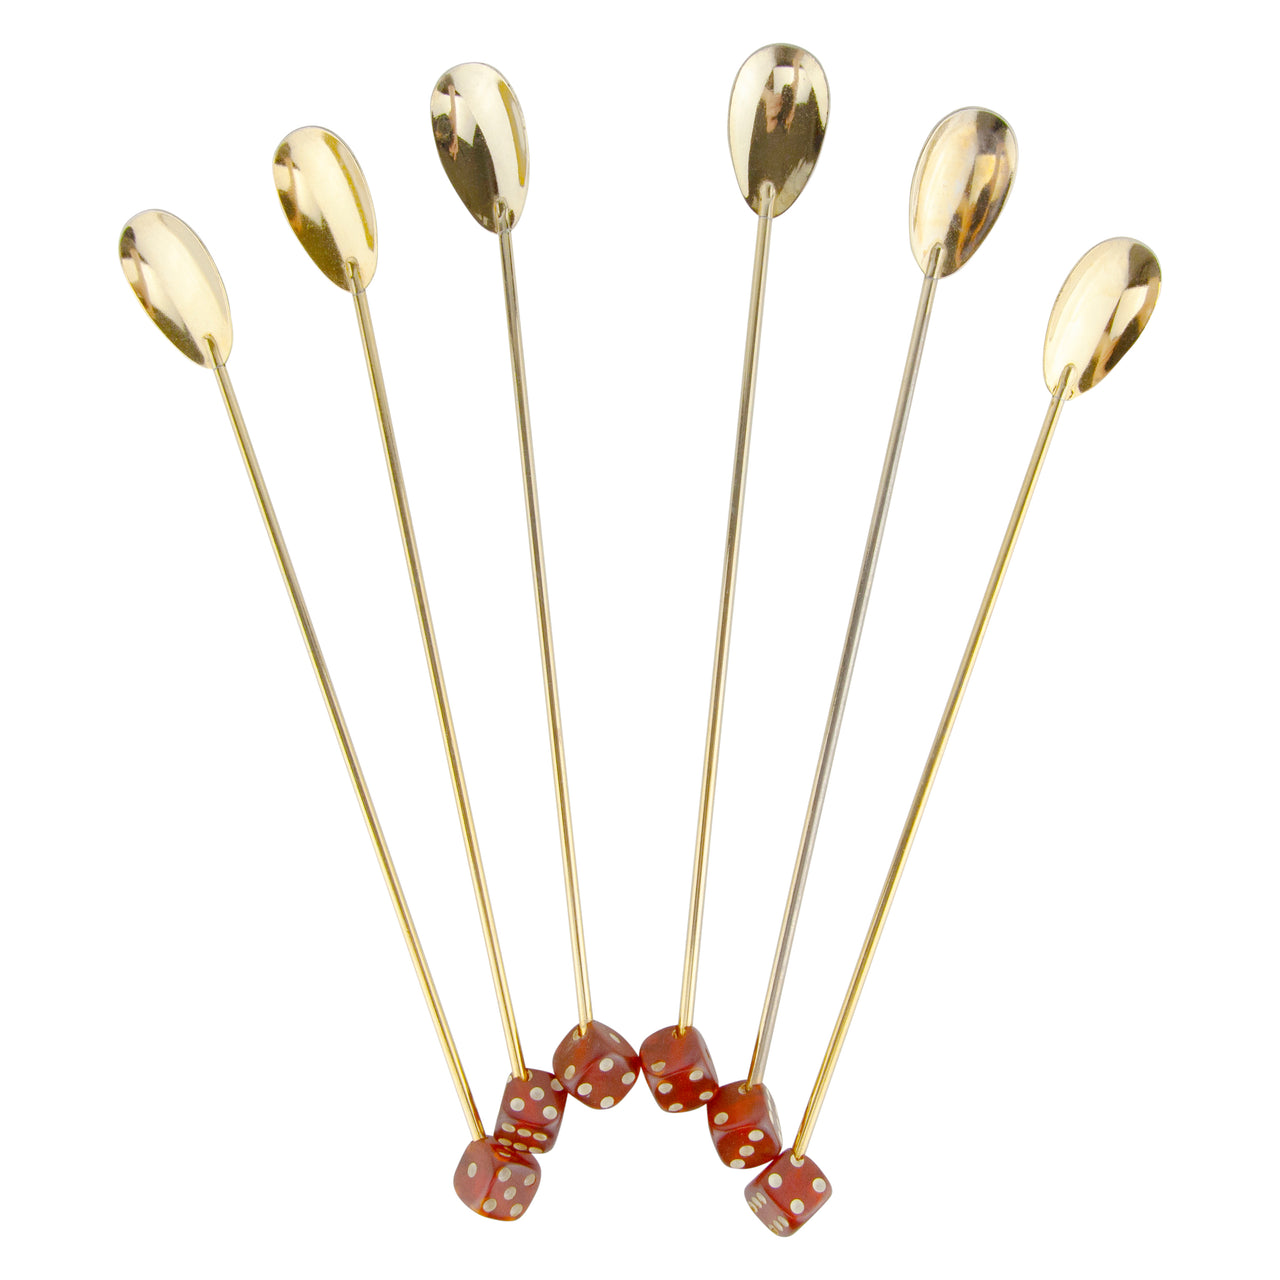 Vintage Amber Dice End Gold Stir Spoons | The Hour Barware